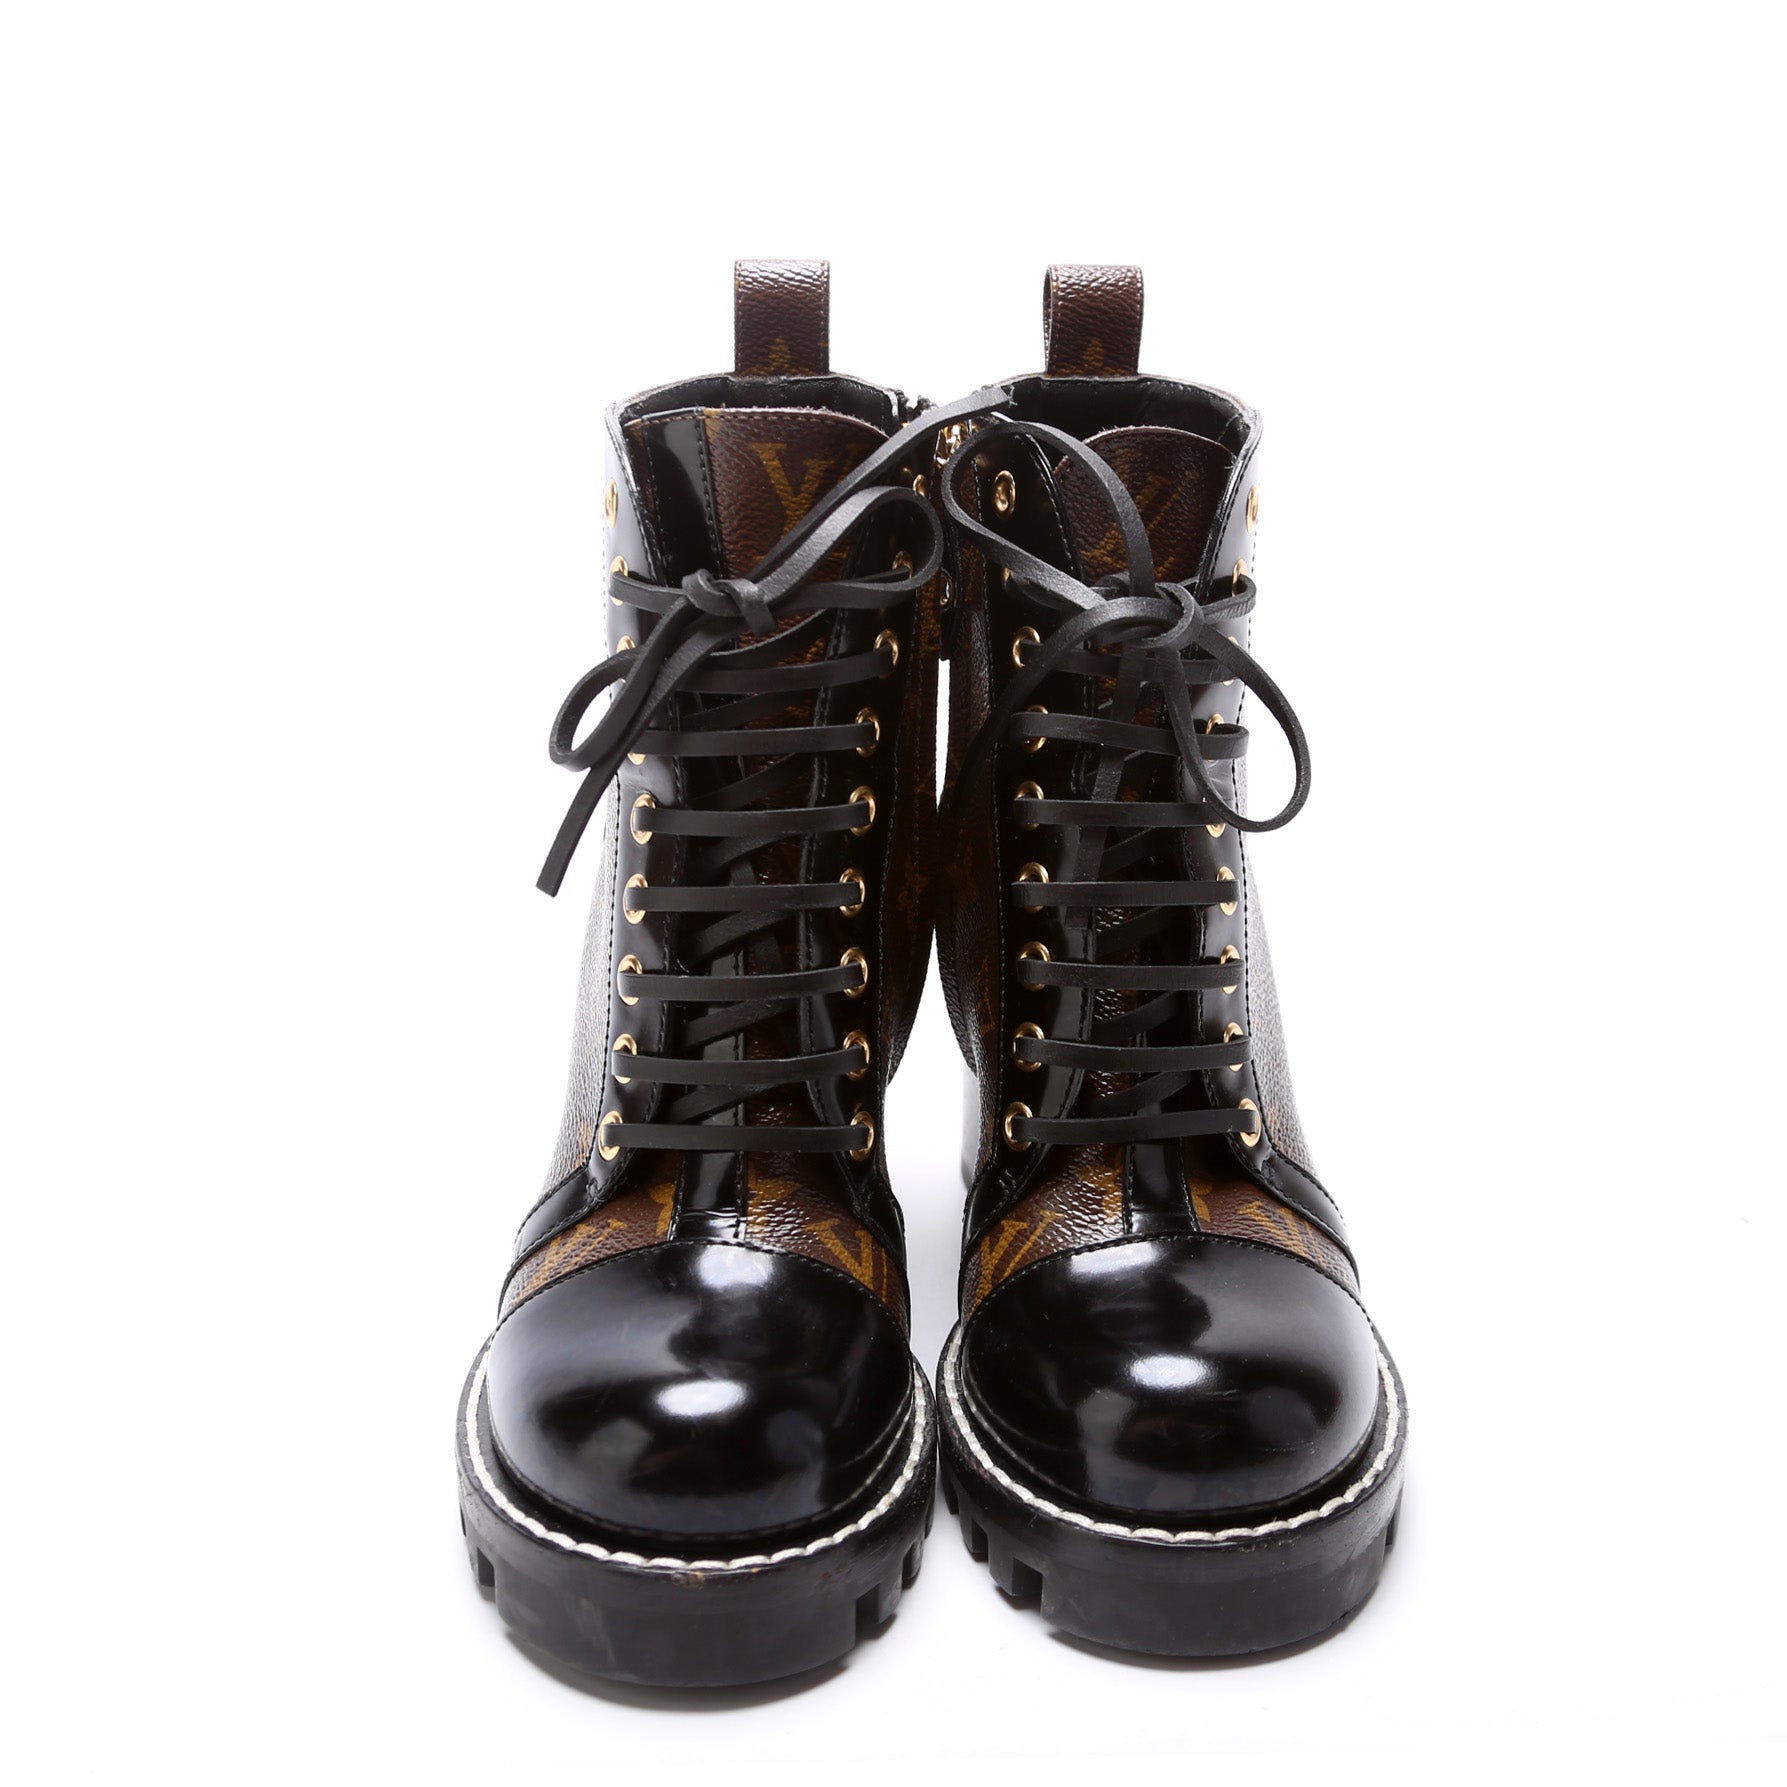 Louis Vuitton - Authenticated Star Trail Ankle Boots - Leather Brown for Women, Very Good Condition